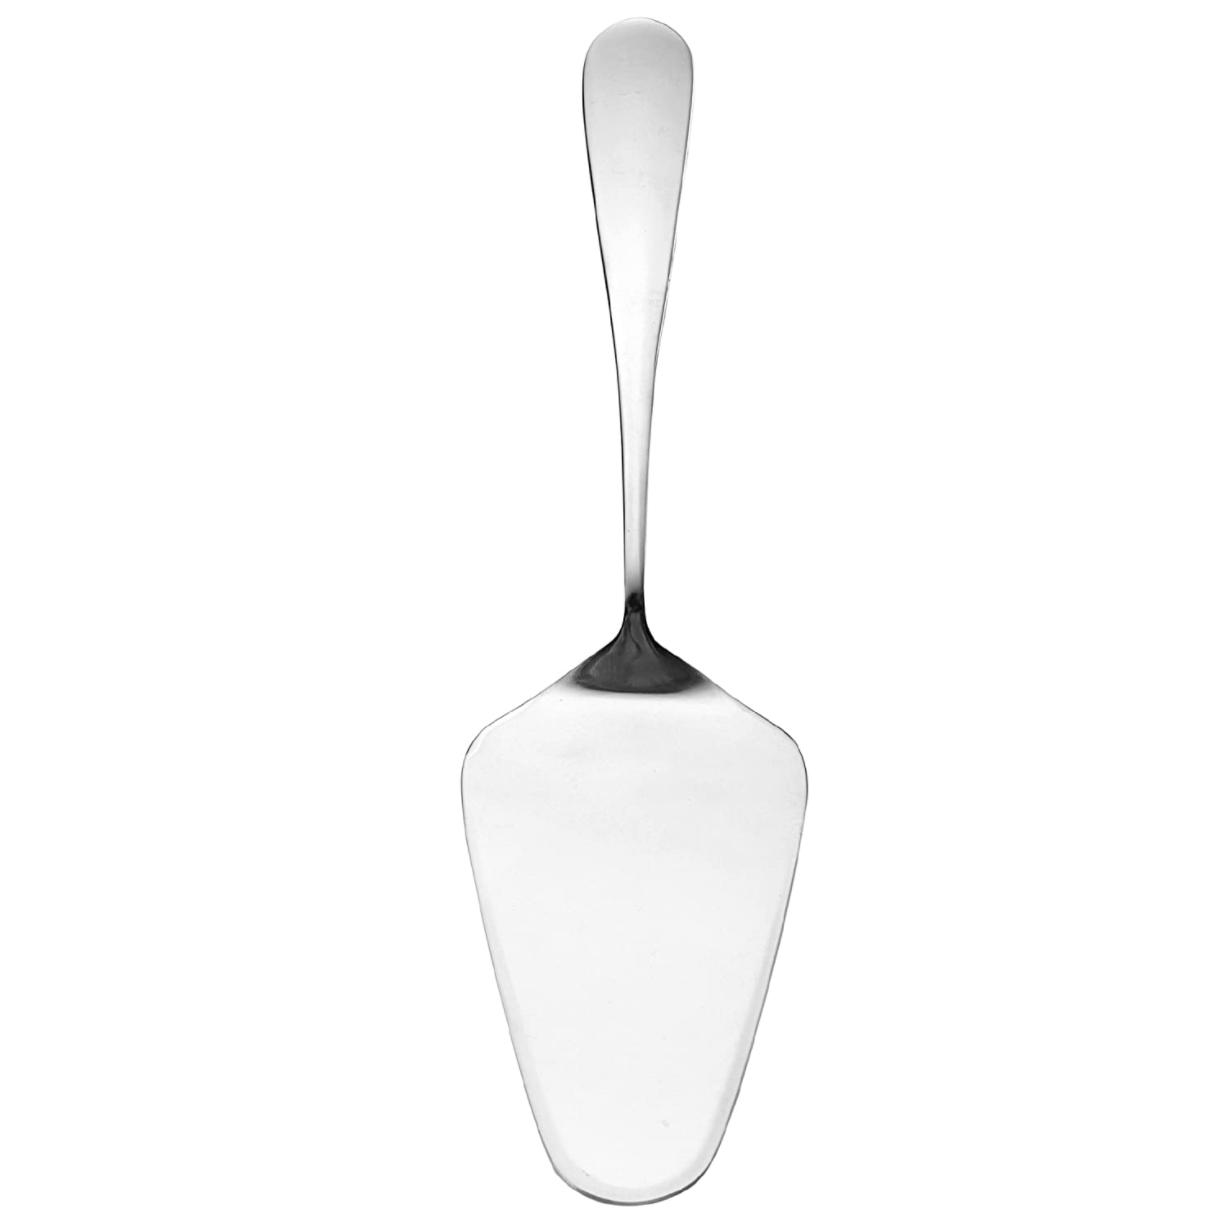 Towle Stainless Steel Pie Server